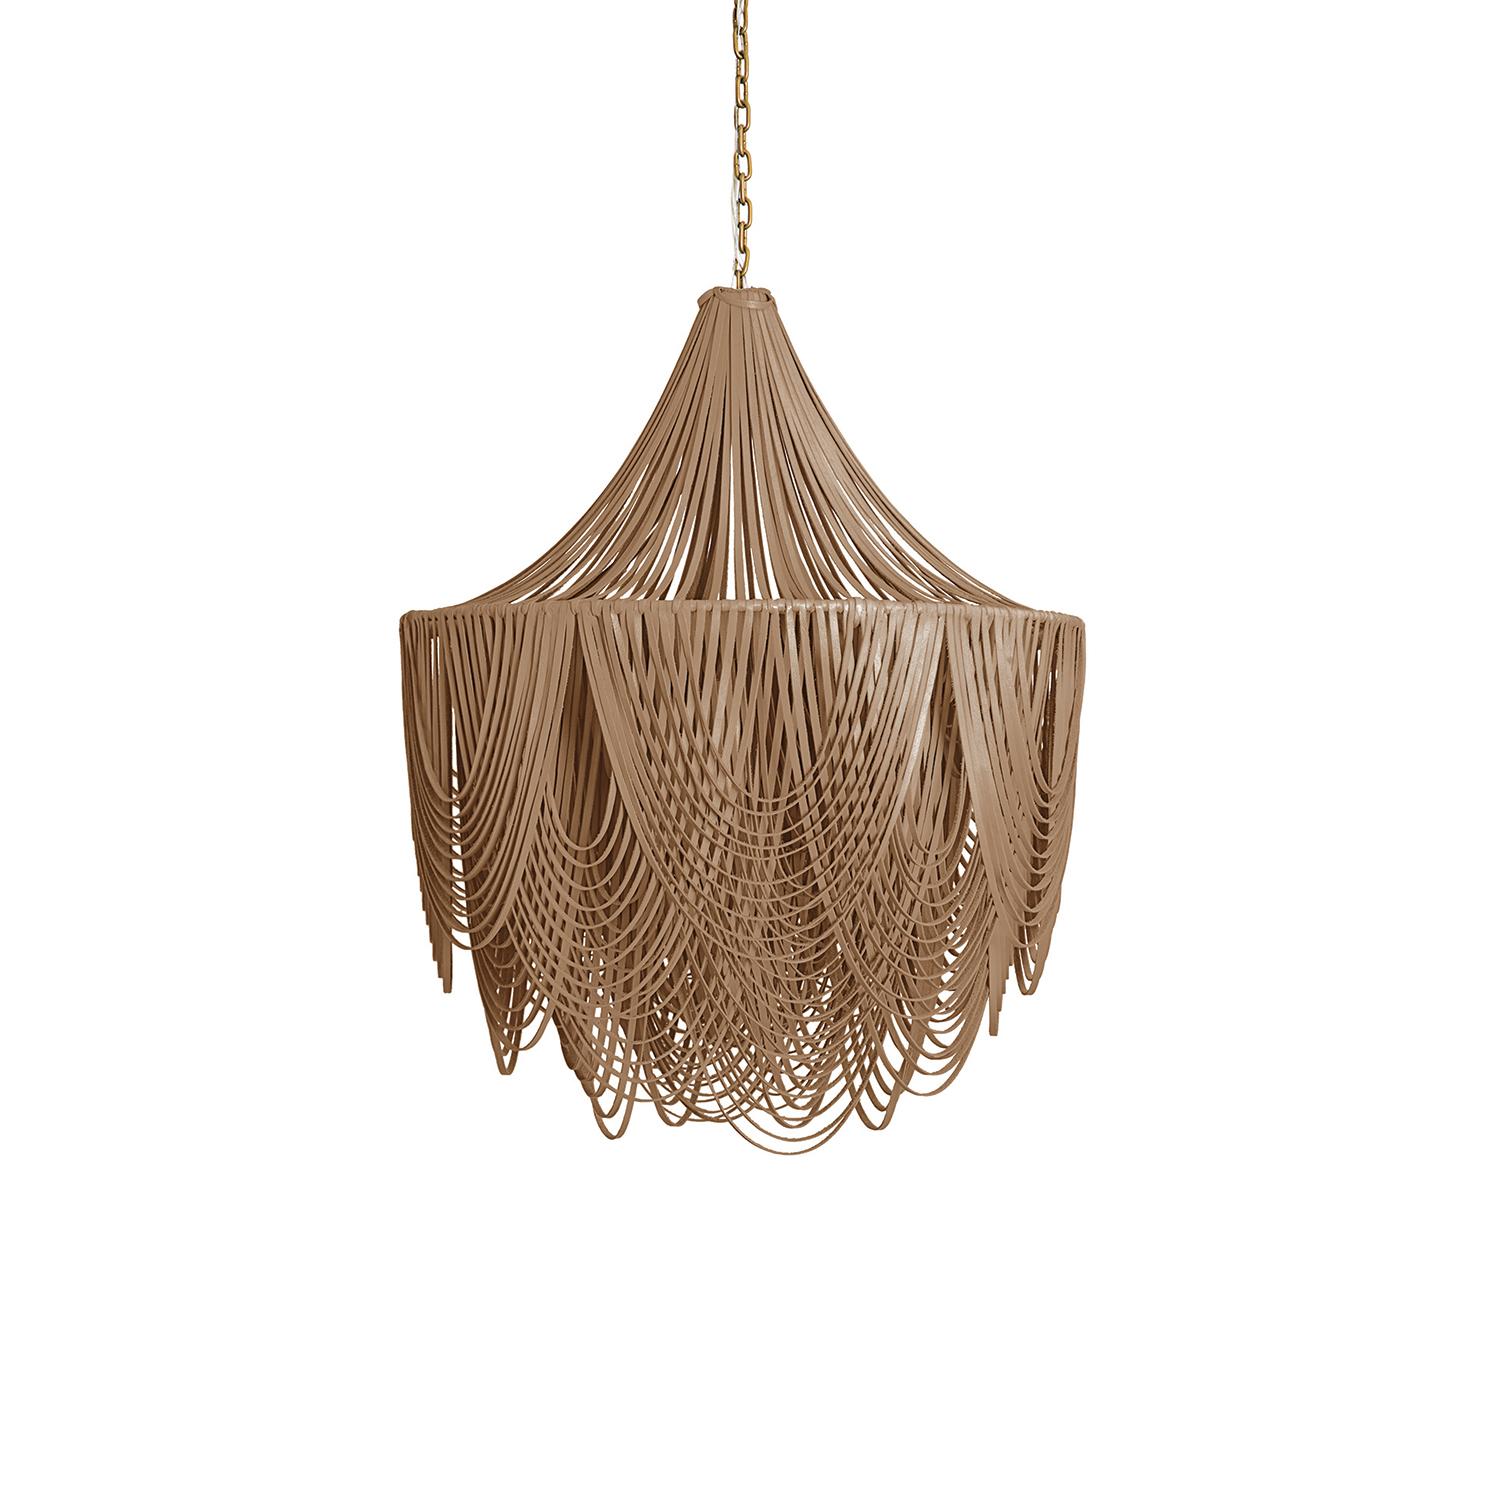 Medium Round Whisper with Crown Leather Chandelier in Metallic Leather